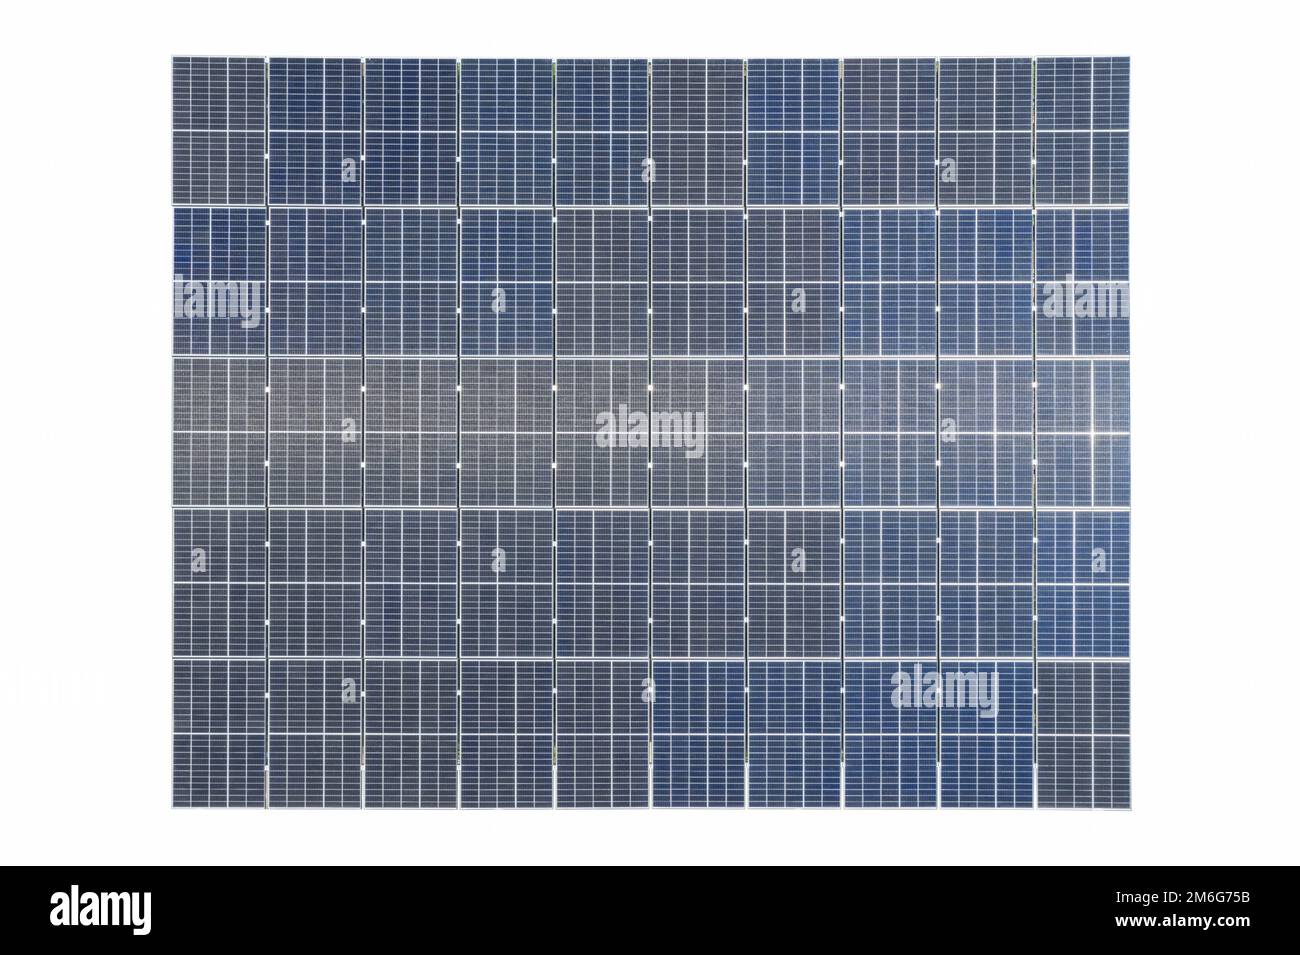 Solar panels on roof isolated Stock Photo